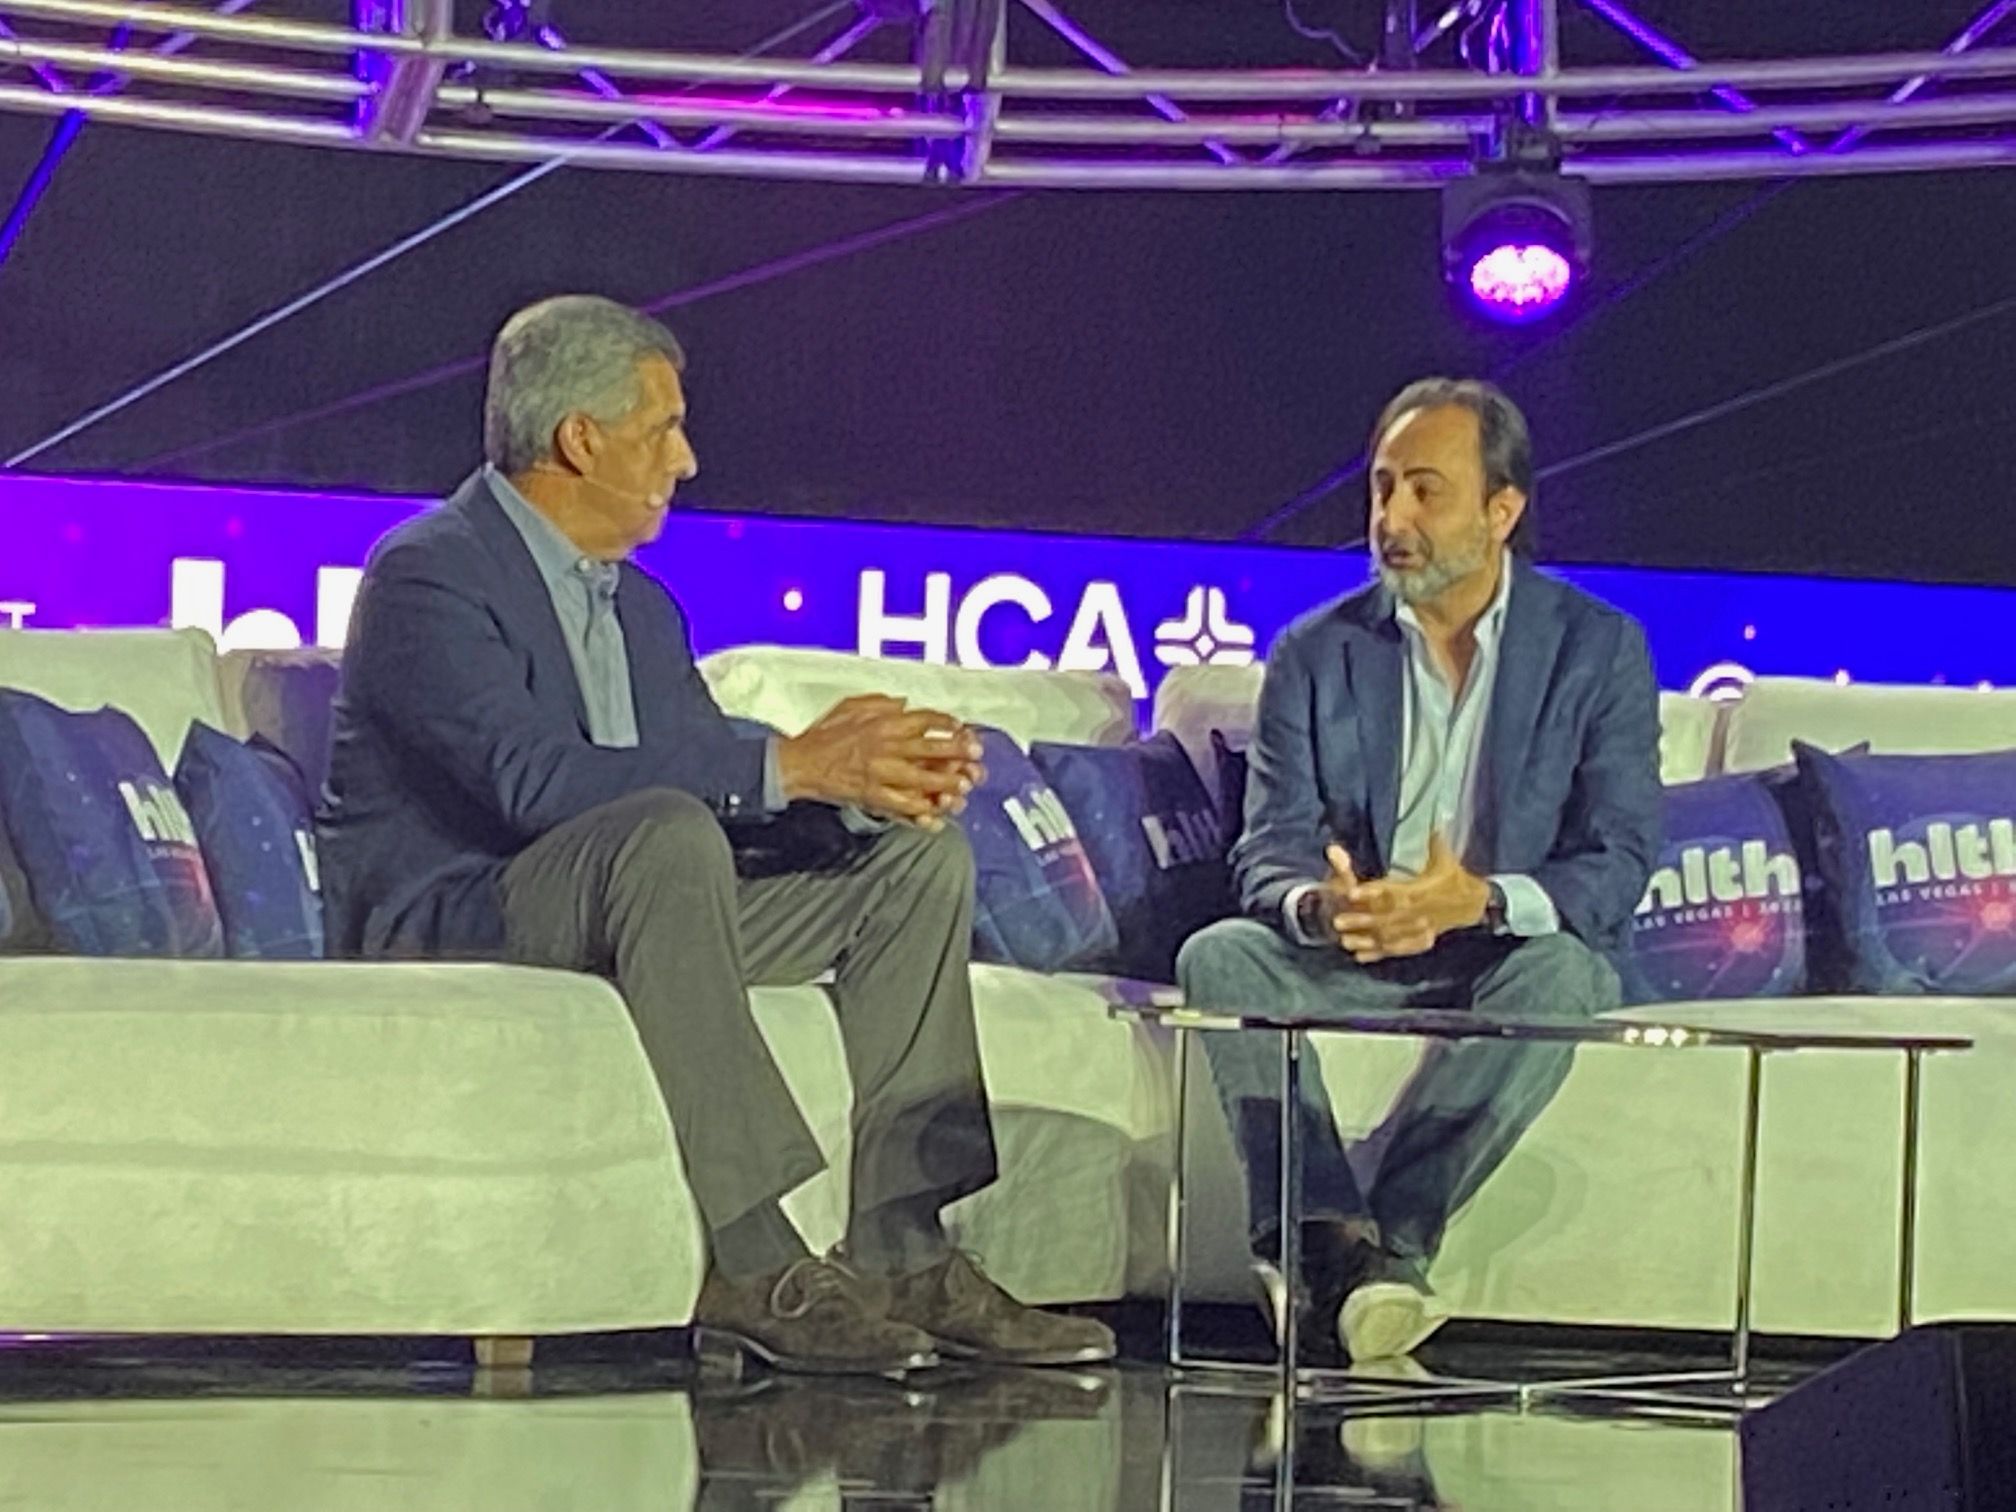 Sam Hazen, CEO of HCA Healthcare, left, talks with Hemant Taneja, CEO and managing partner of General Catalyst, at the HLTH Conference in Las Vegas, Sunday, Nov. 13. (Photo: Ron Southwick)